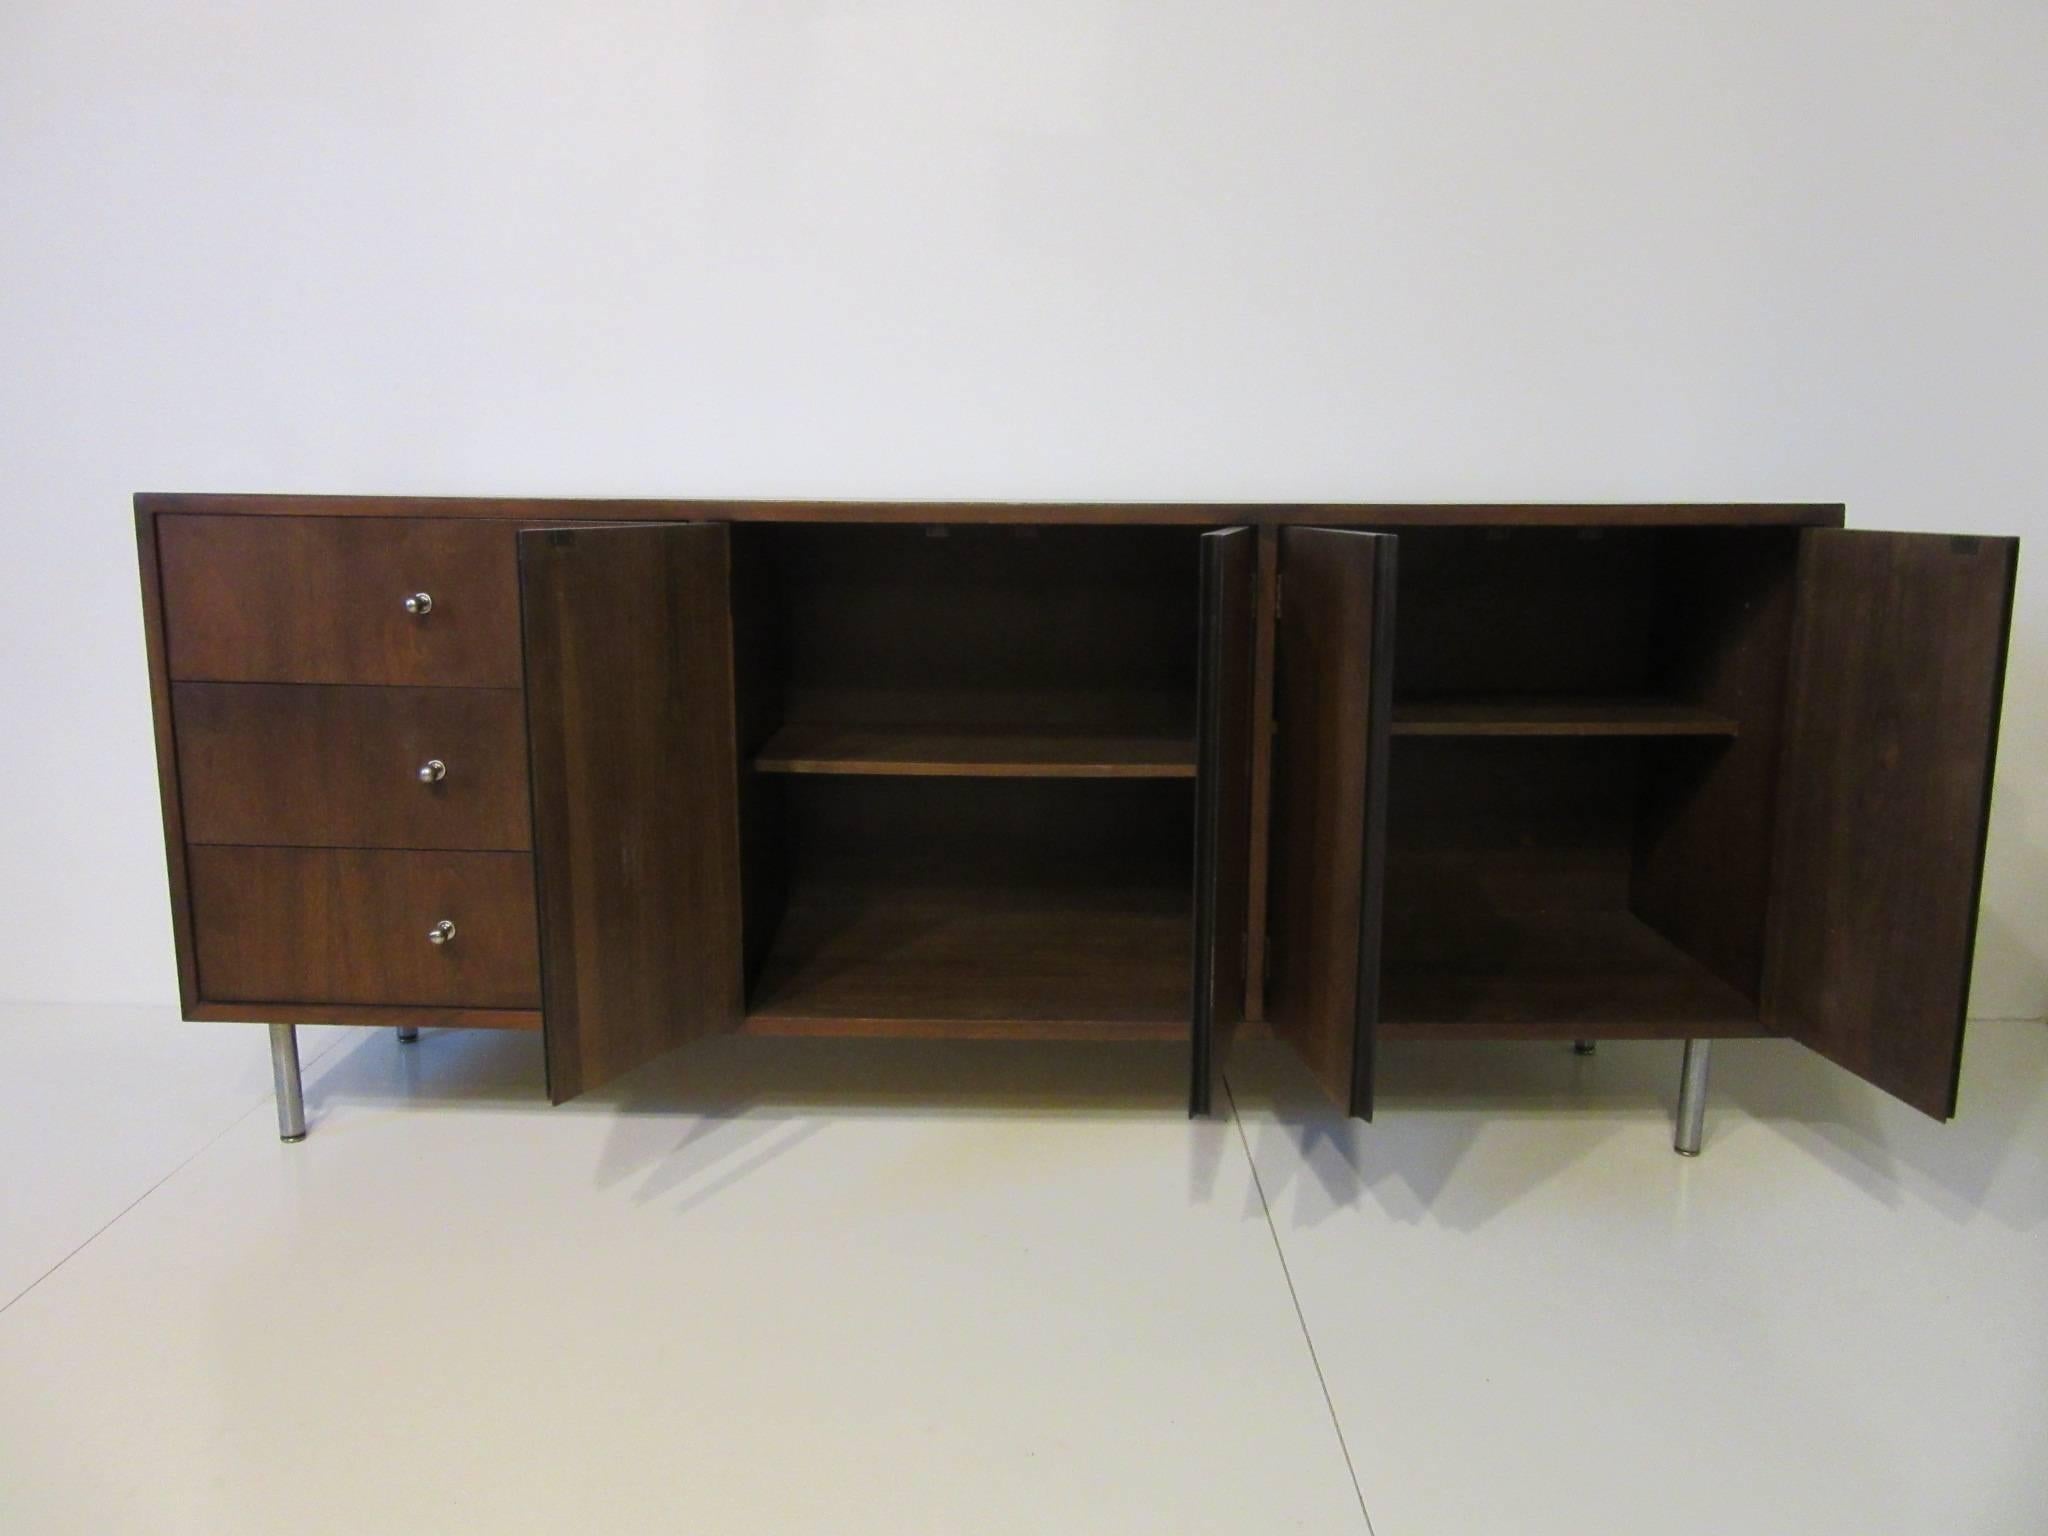 A dark walnut midcentury credenza with four doors, two adjustable shelves and three drawers with brushed stainless pulls that match the legs in the manner of George Nelson.